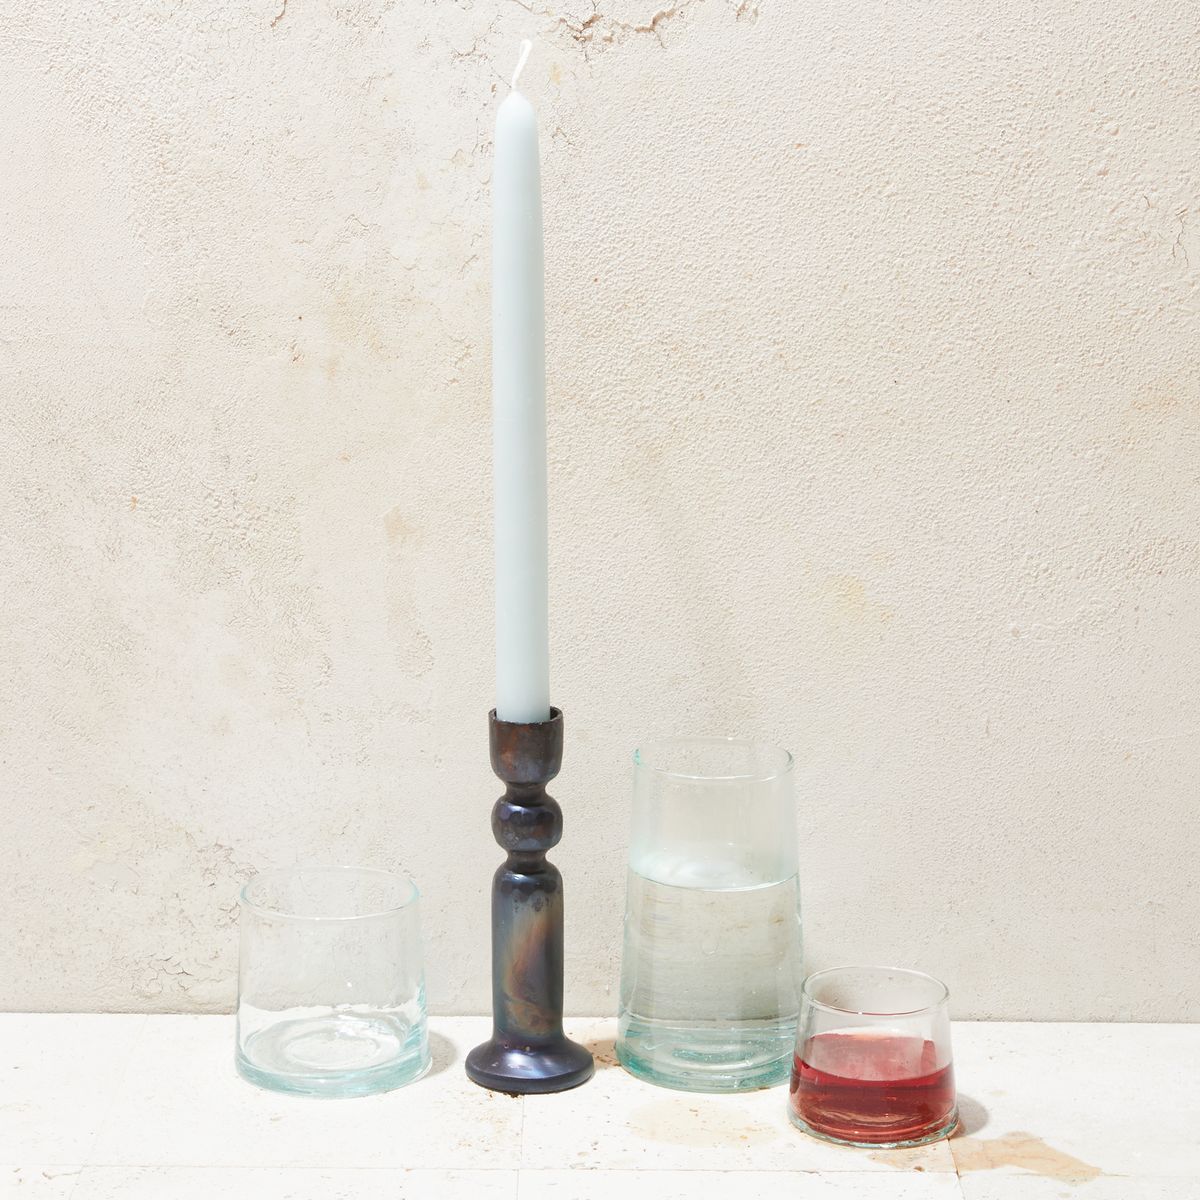 Iron Urbino Candlestick with candle in it surrounded by glasses